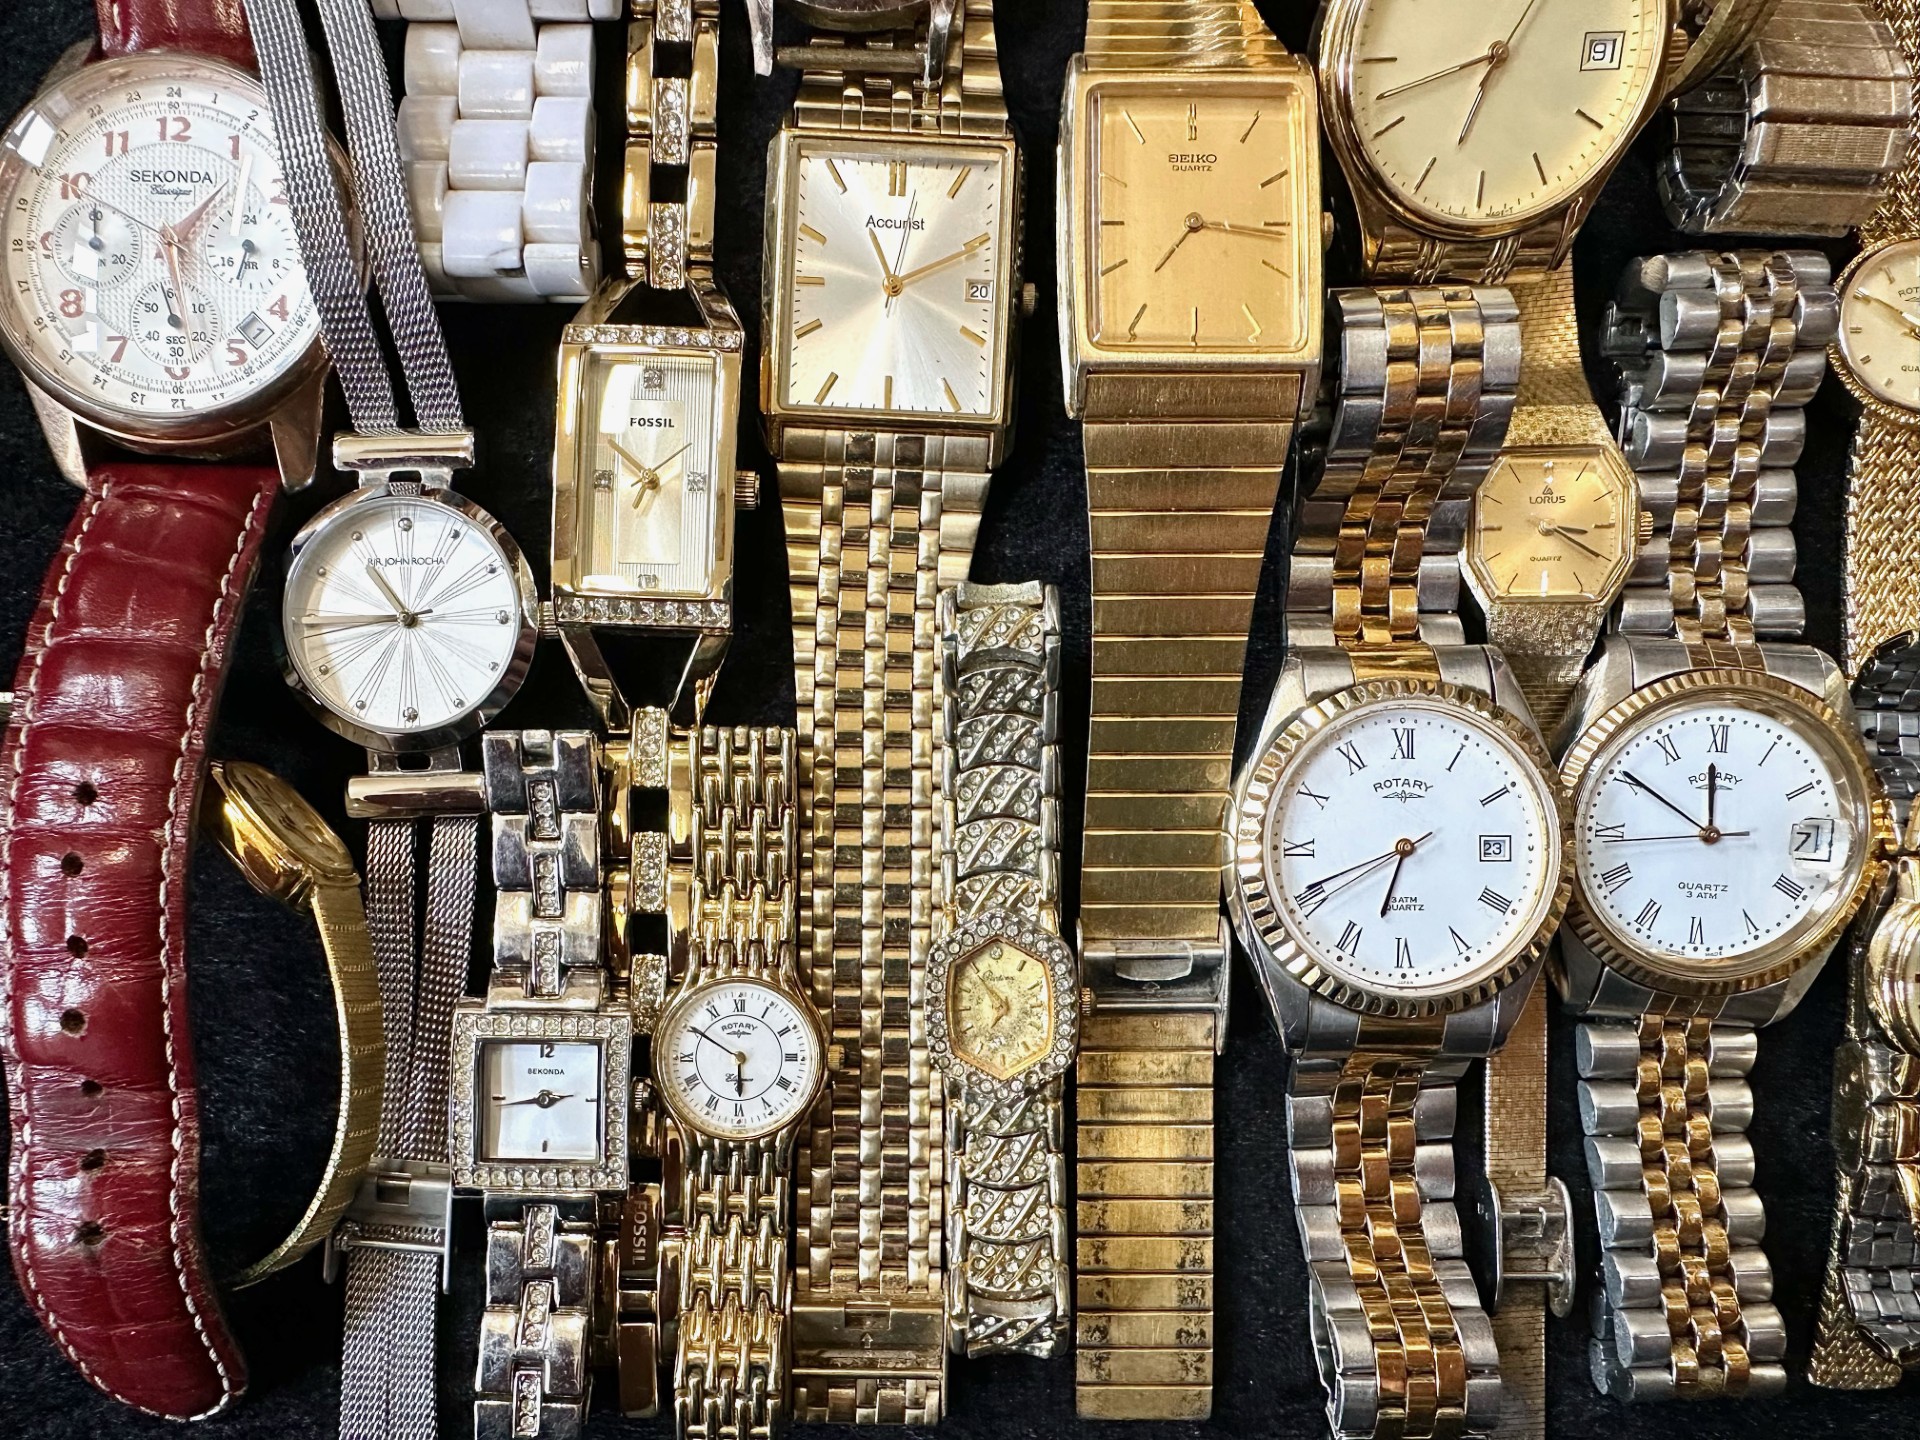 Collection of Ladies & Gentleman's Wristwatches, makes to include Rotary, Sekinda, Citizen, - Image 3 of 4